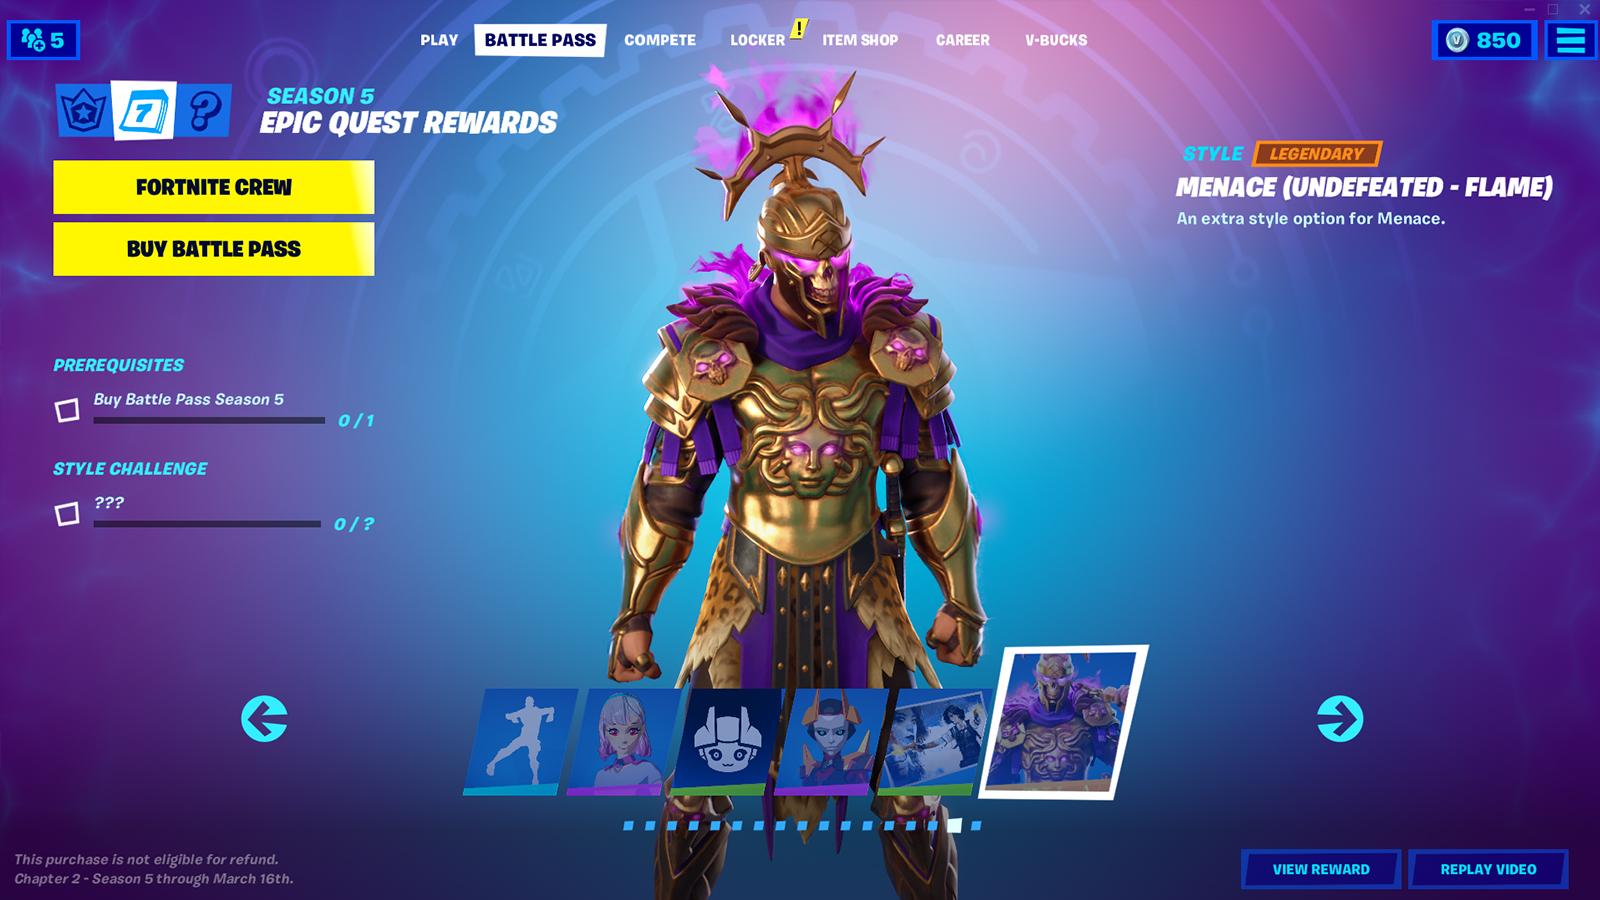 Image showing the final current rewards for this season's Battle Pass